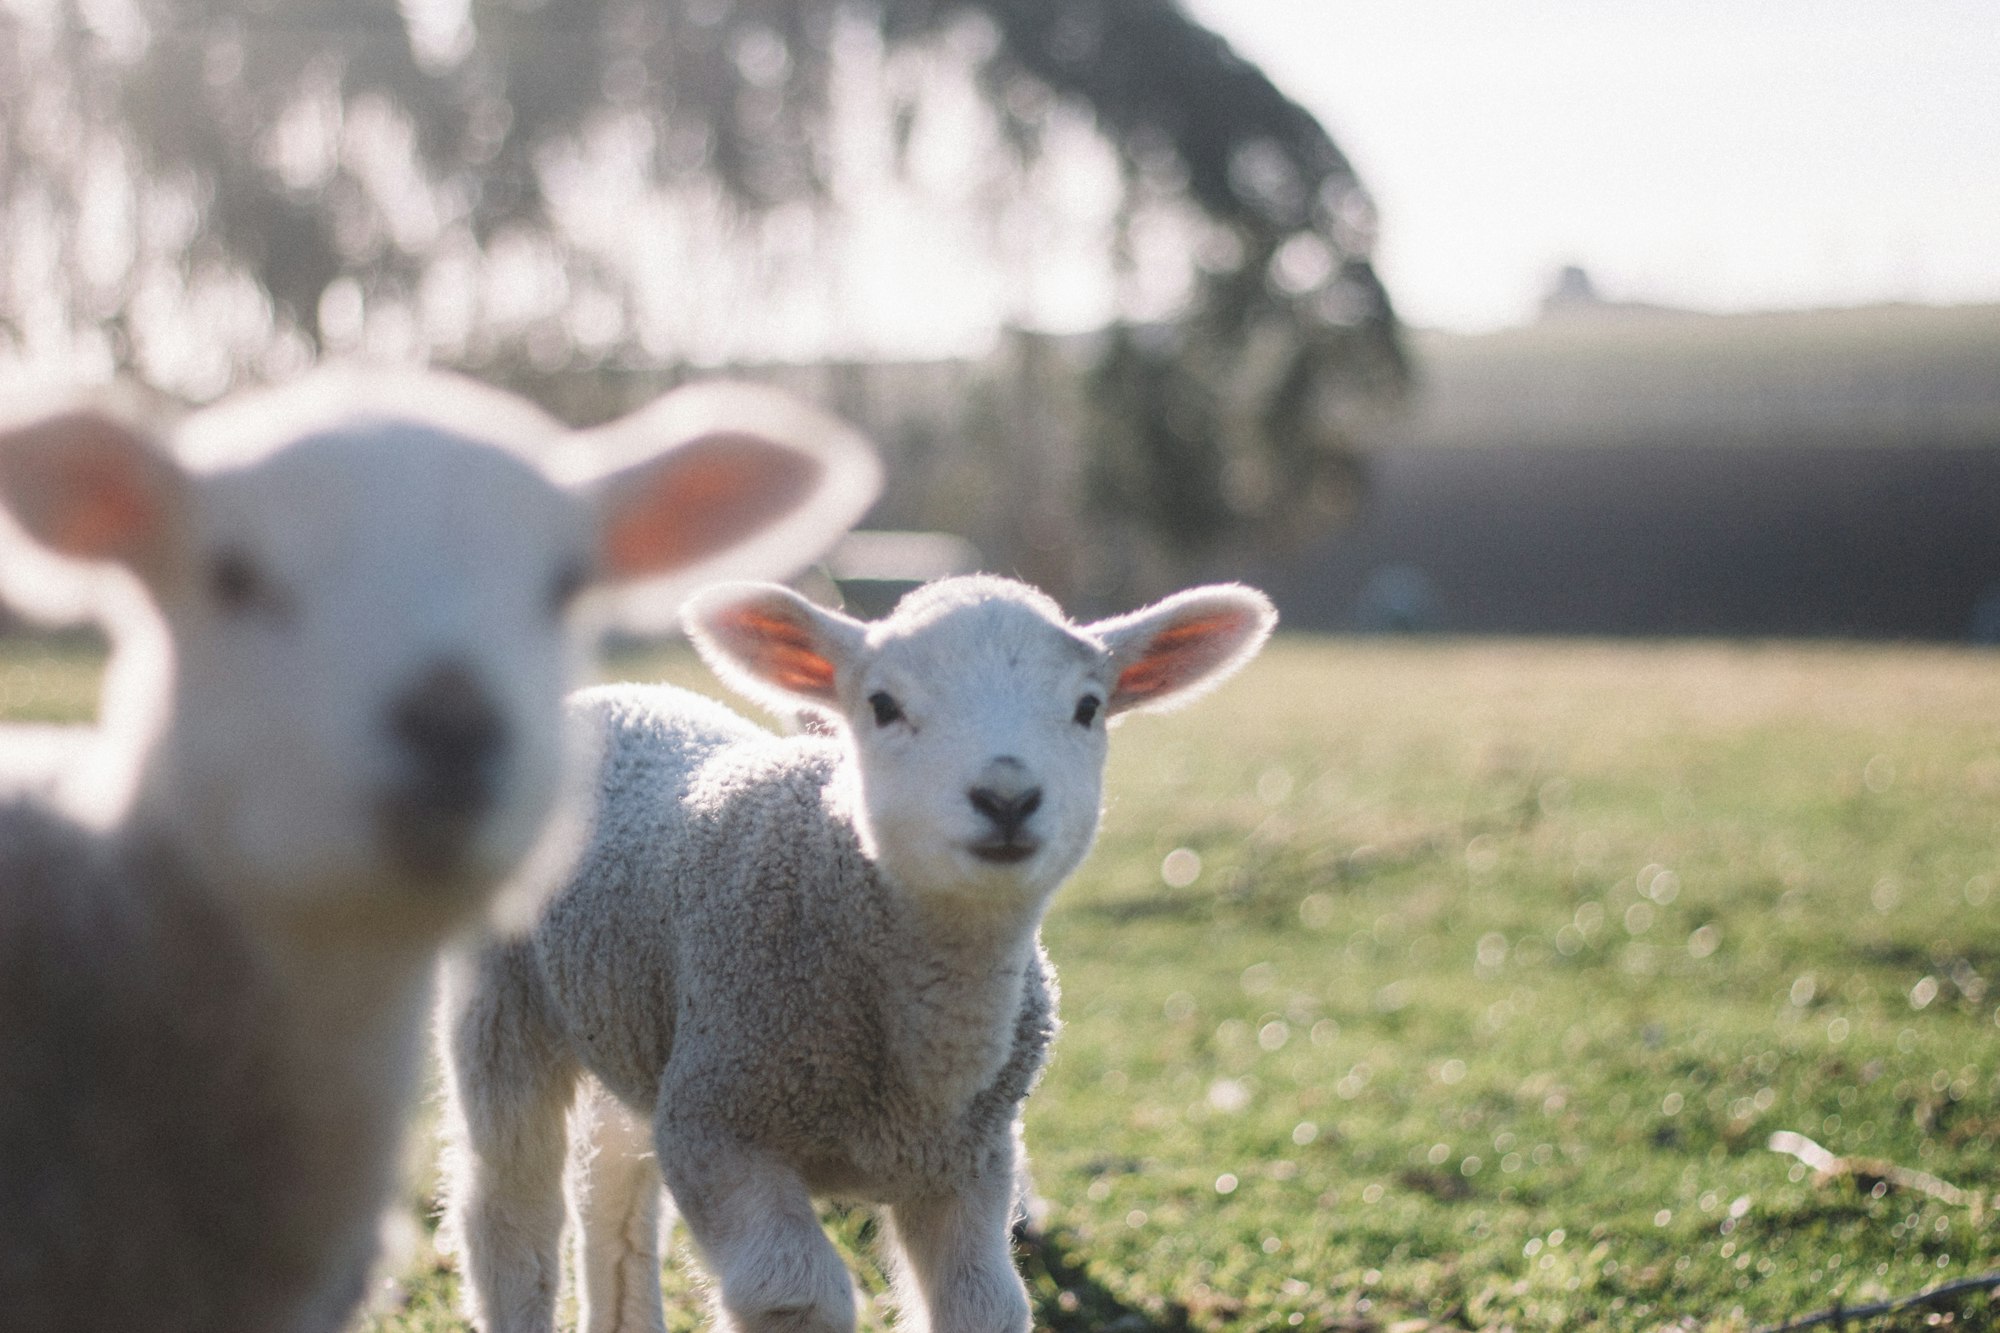 Two lambs on a field